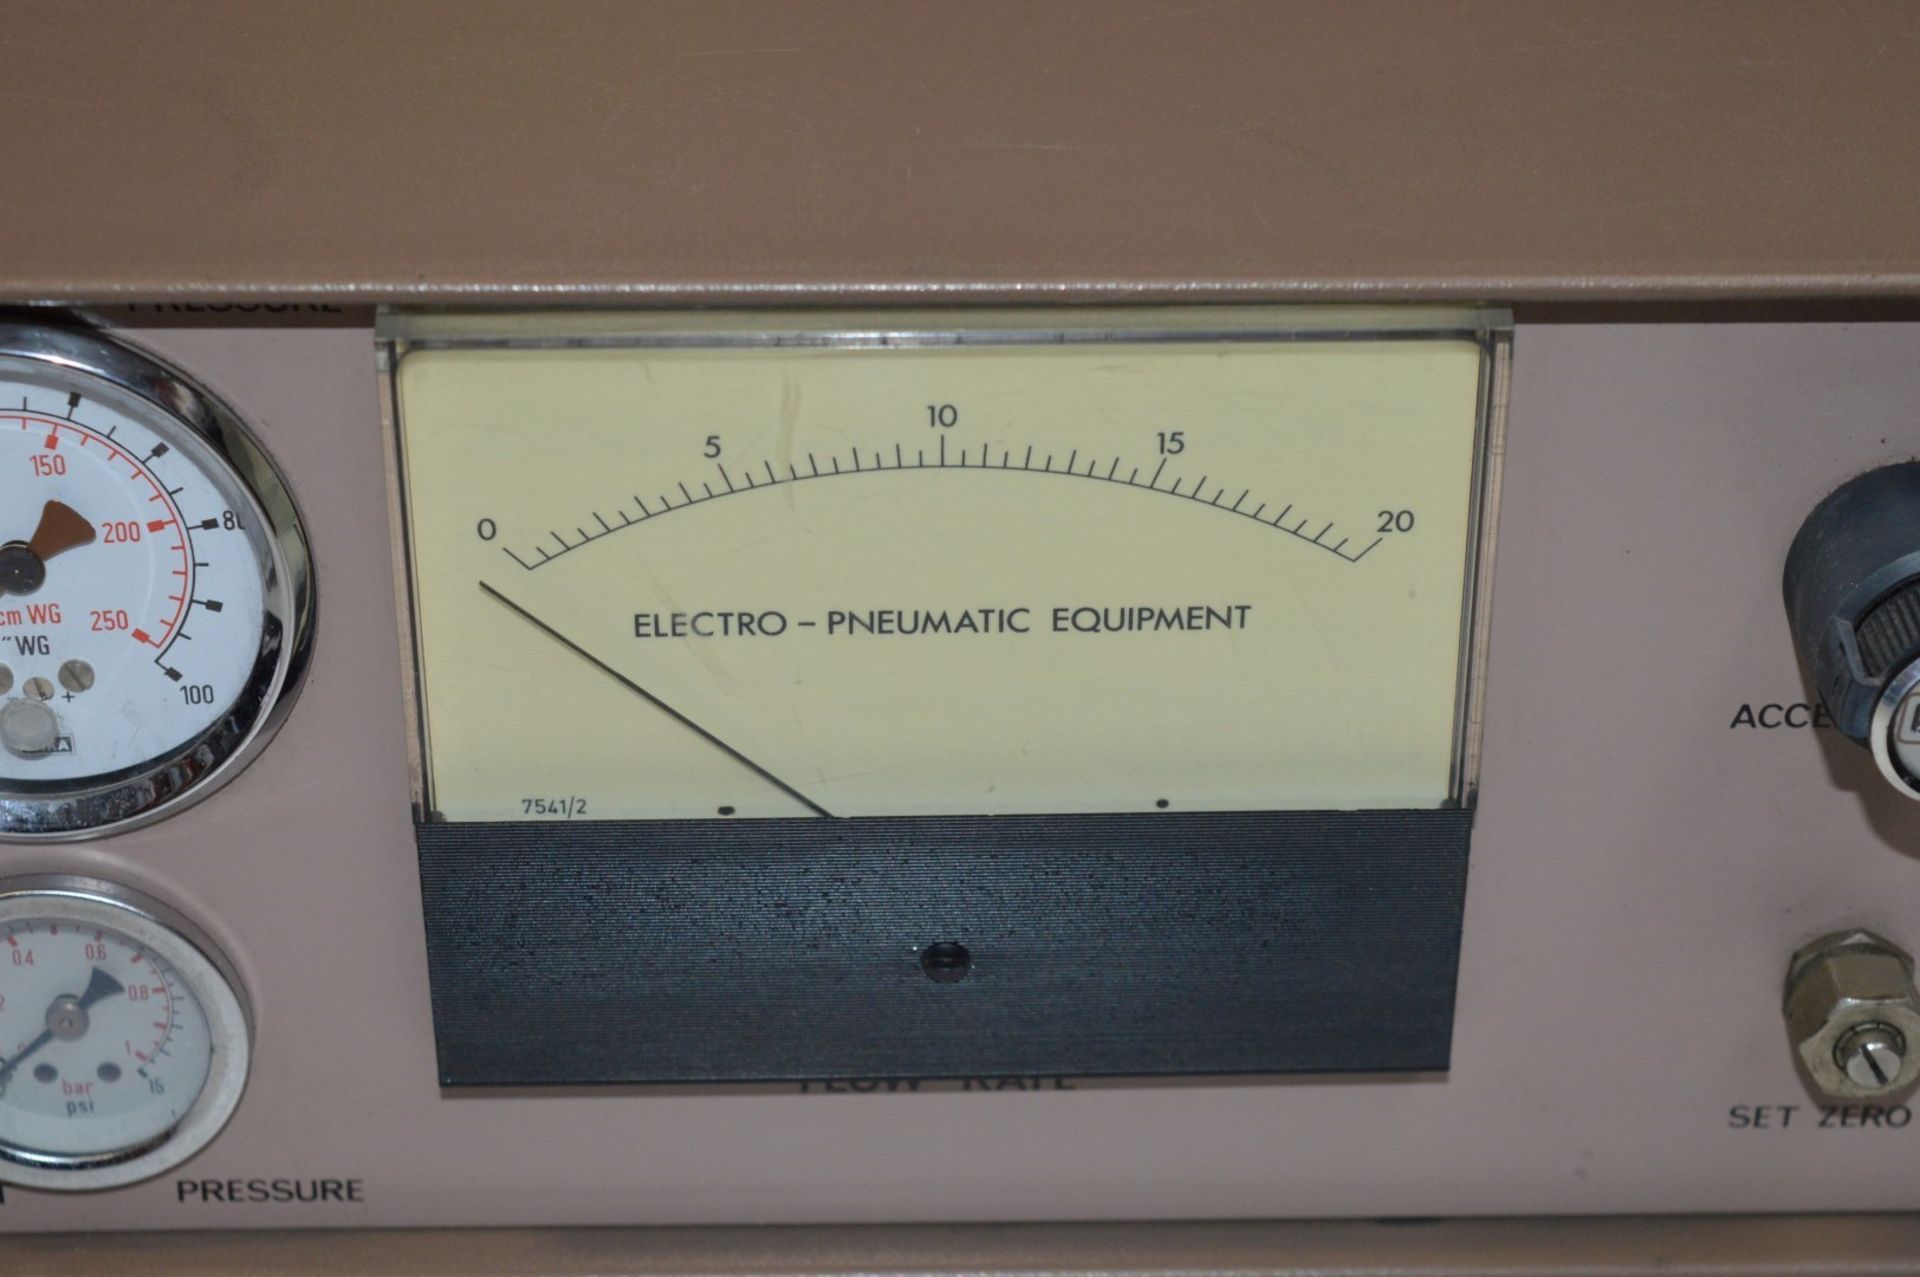 1 x Epetron 200 Mk2 Electro Pneumatic Tester - Vintage Test Equipment - CL011 - Ref J611 - Location: - Image 4 of 8